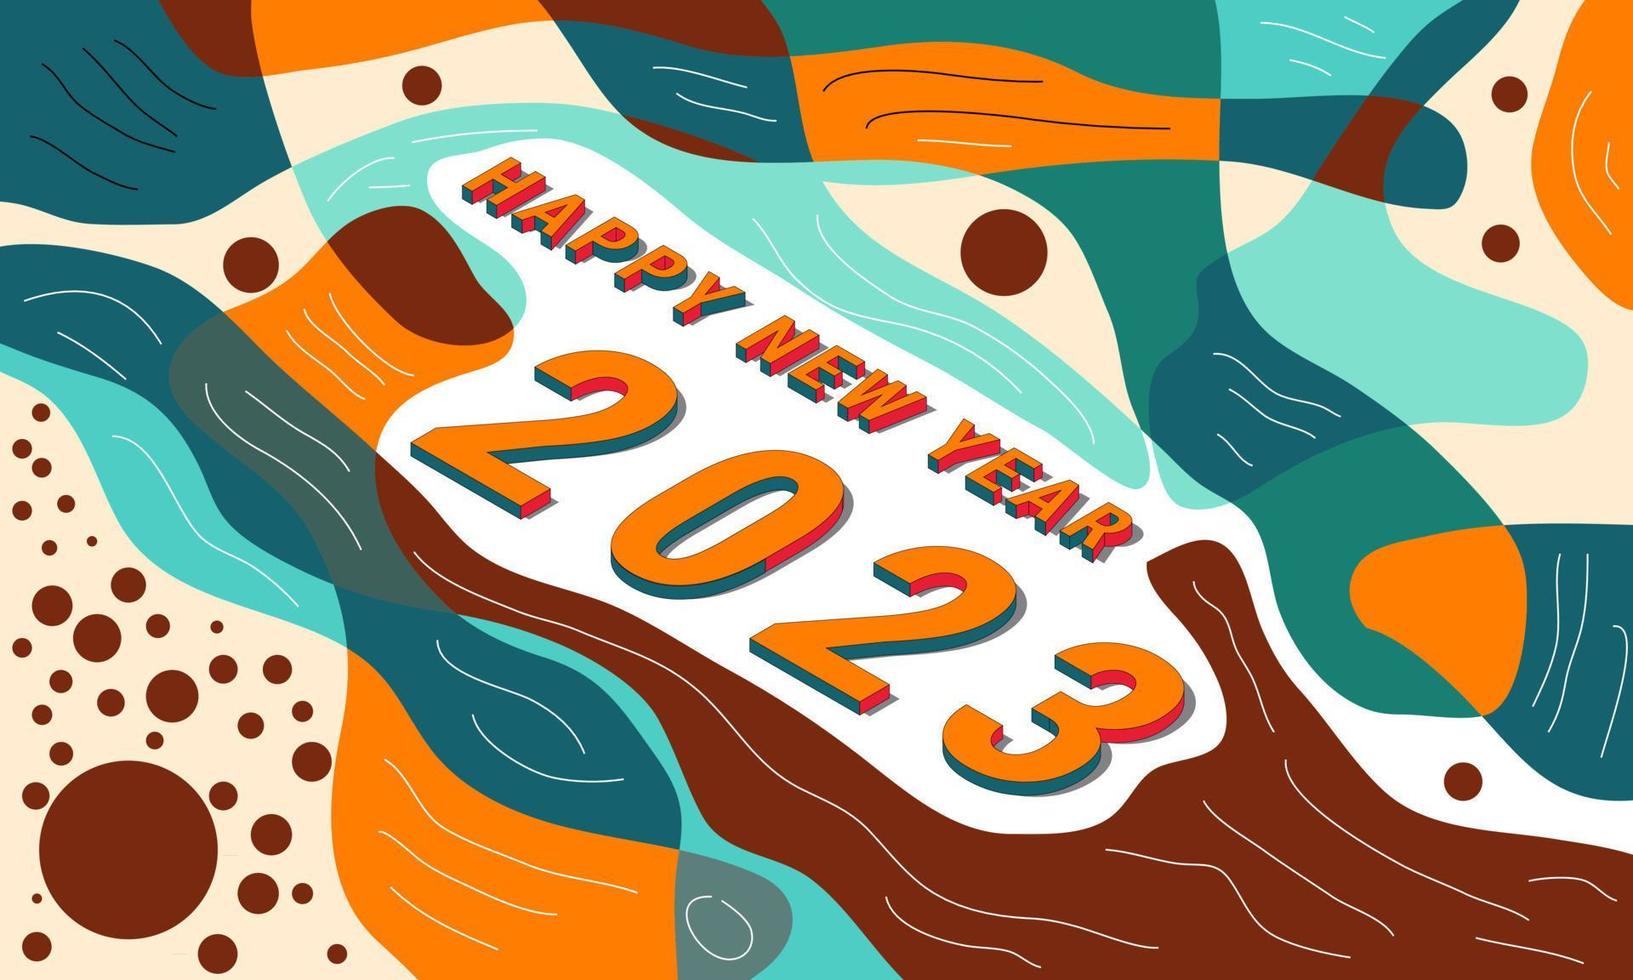 2023 A Happy New Year Congrats Happy Colorfull Concept Backdrop Abstract Isolated Graphic Design Template Creative Colorful Decoration Free Vector